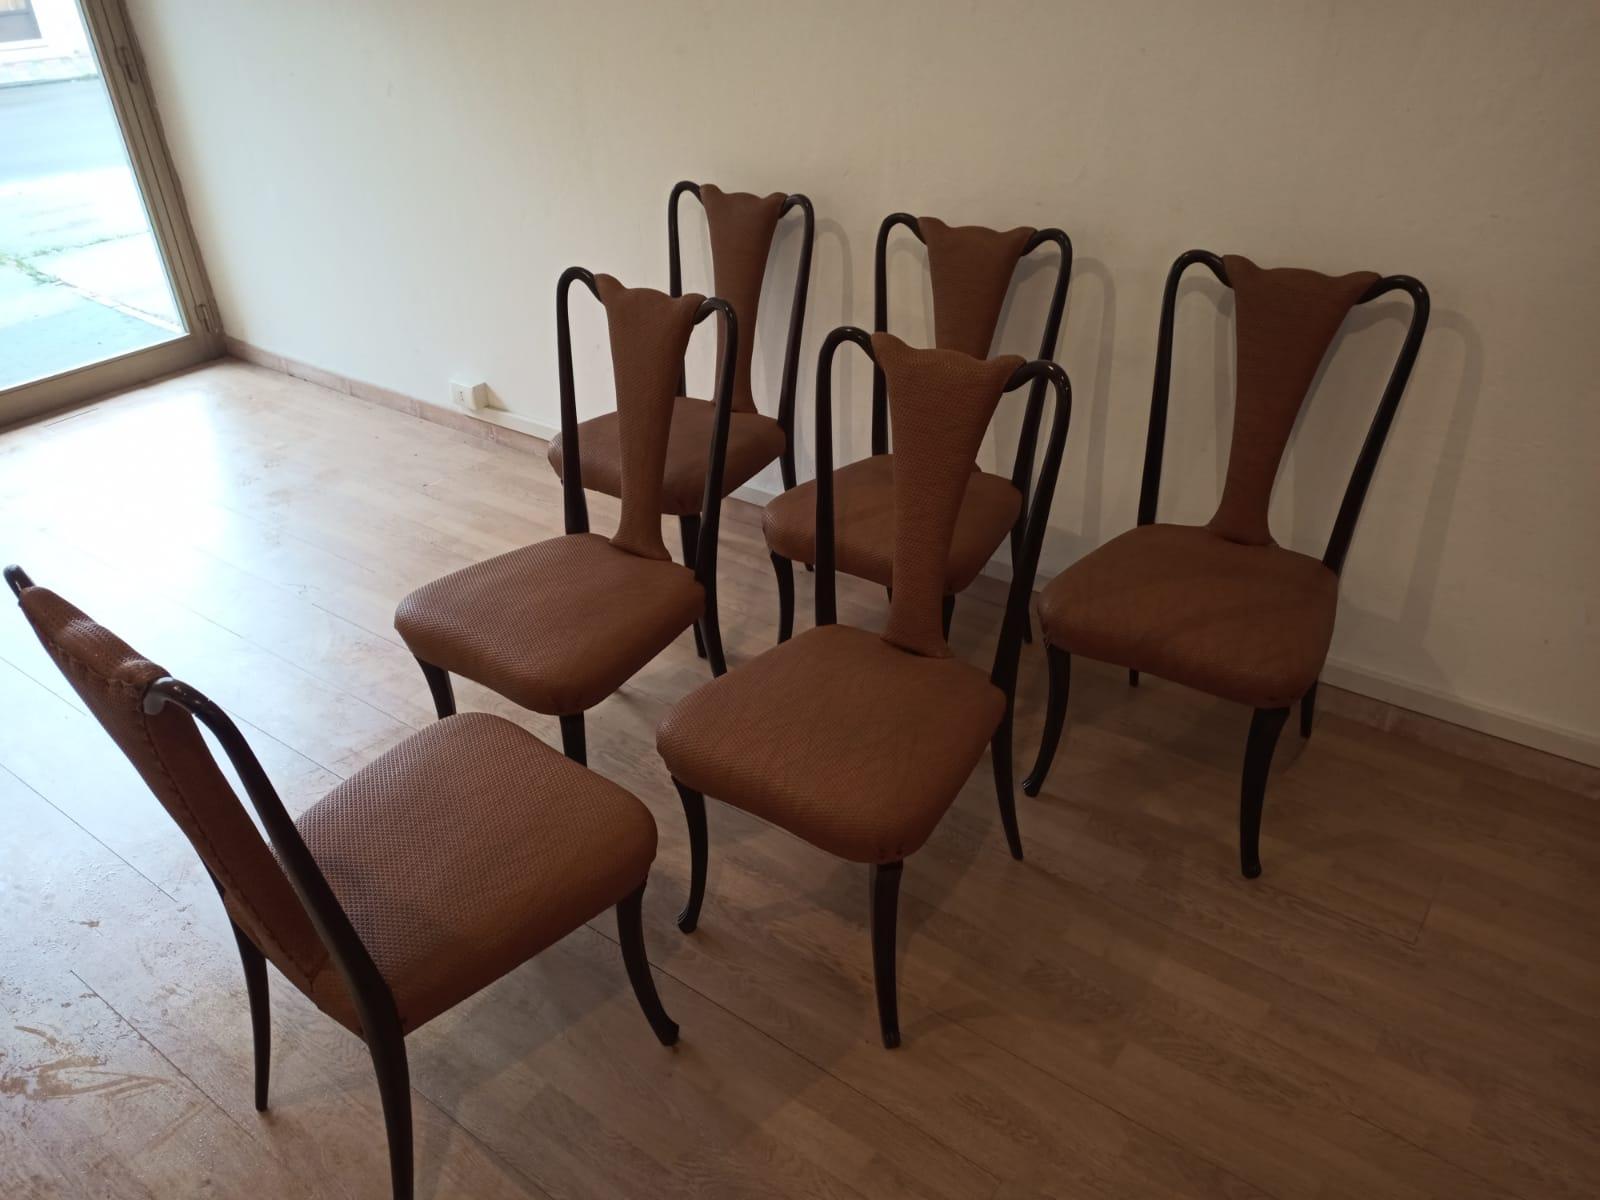 Vittorio Dassi chairs 1950

Subject: Vittorio Dassi chairs
Period: mid-20th century
Style: Mid century modern
Origin: Northern Italy
Description:
Gorgeous Vittorio Dassi chairs in perfect condition.

Made in Brianza in Northern Italy in 1950, they